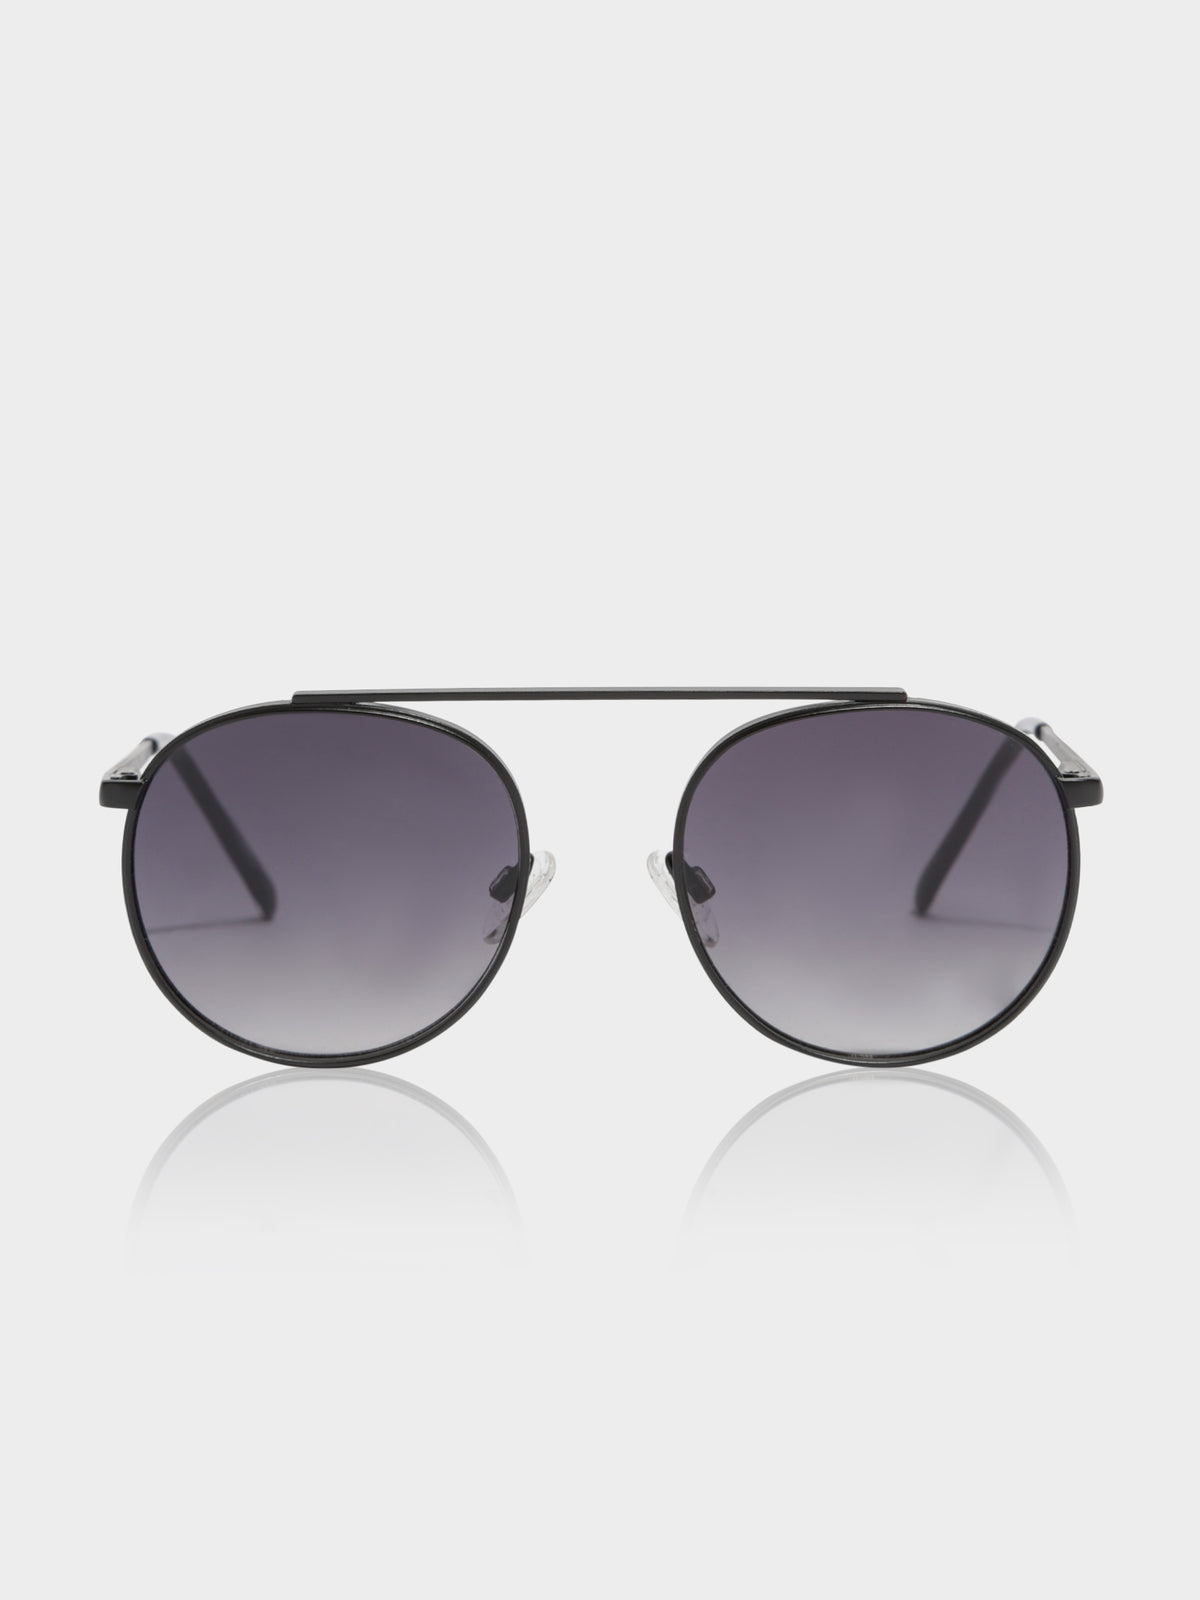 CL1717 Carstage Sunglasses in Black